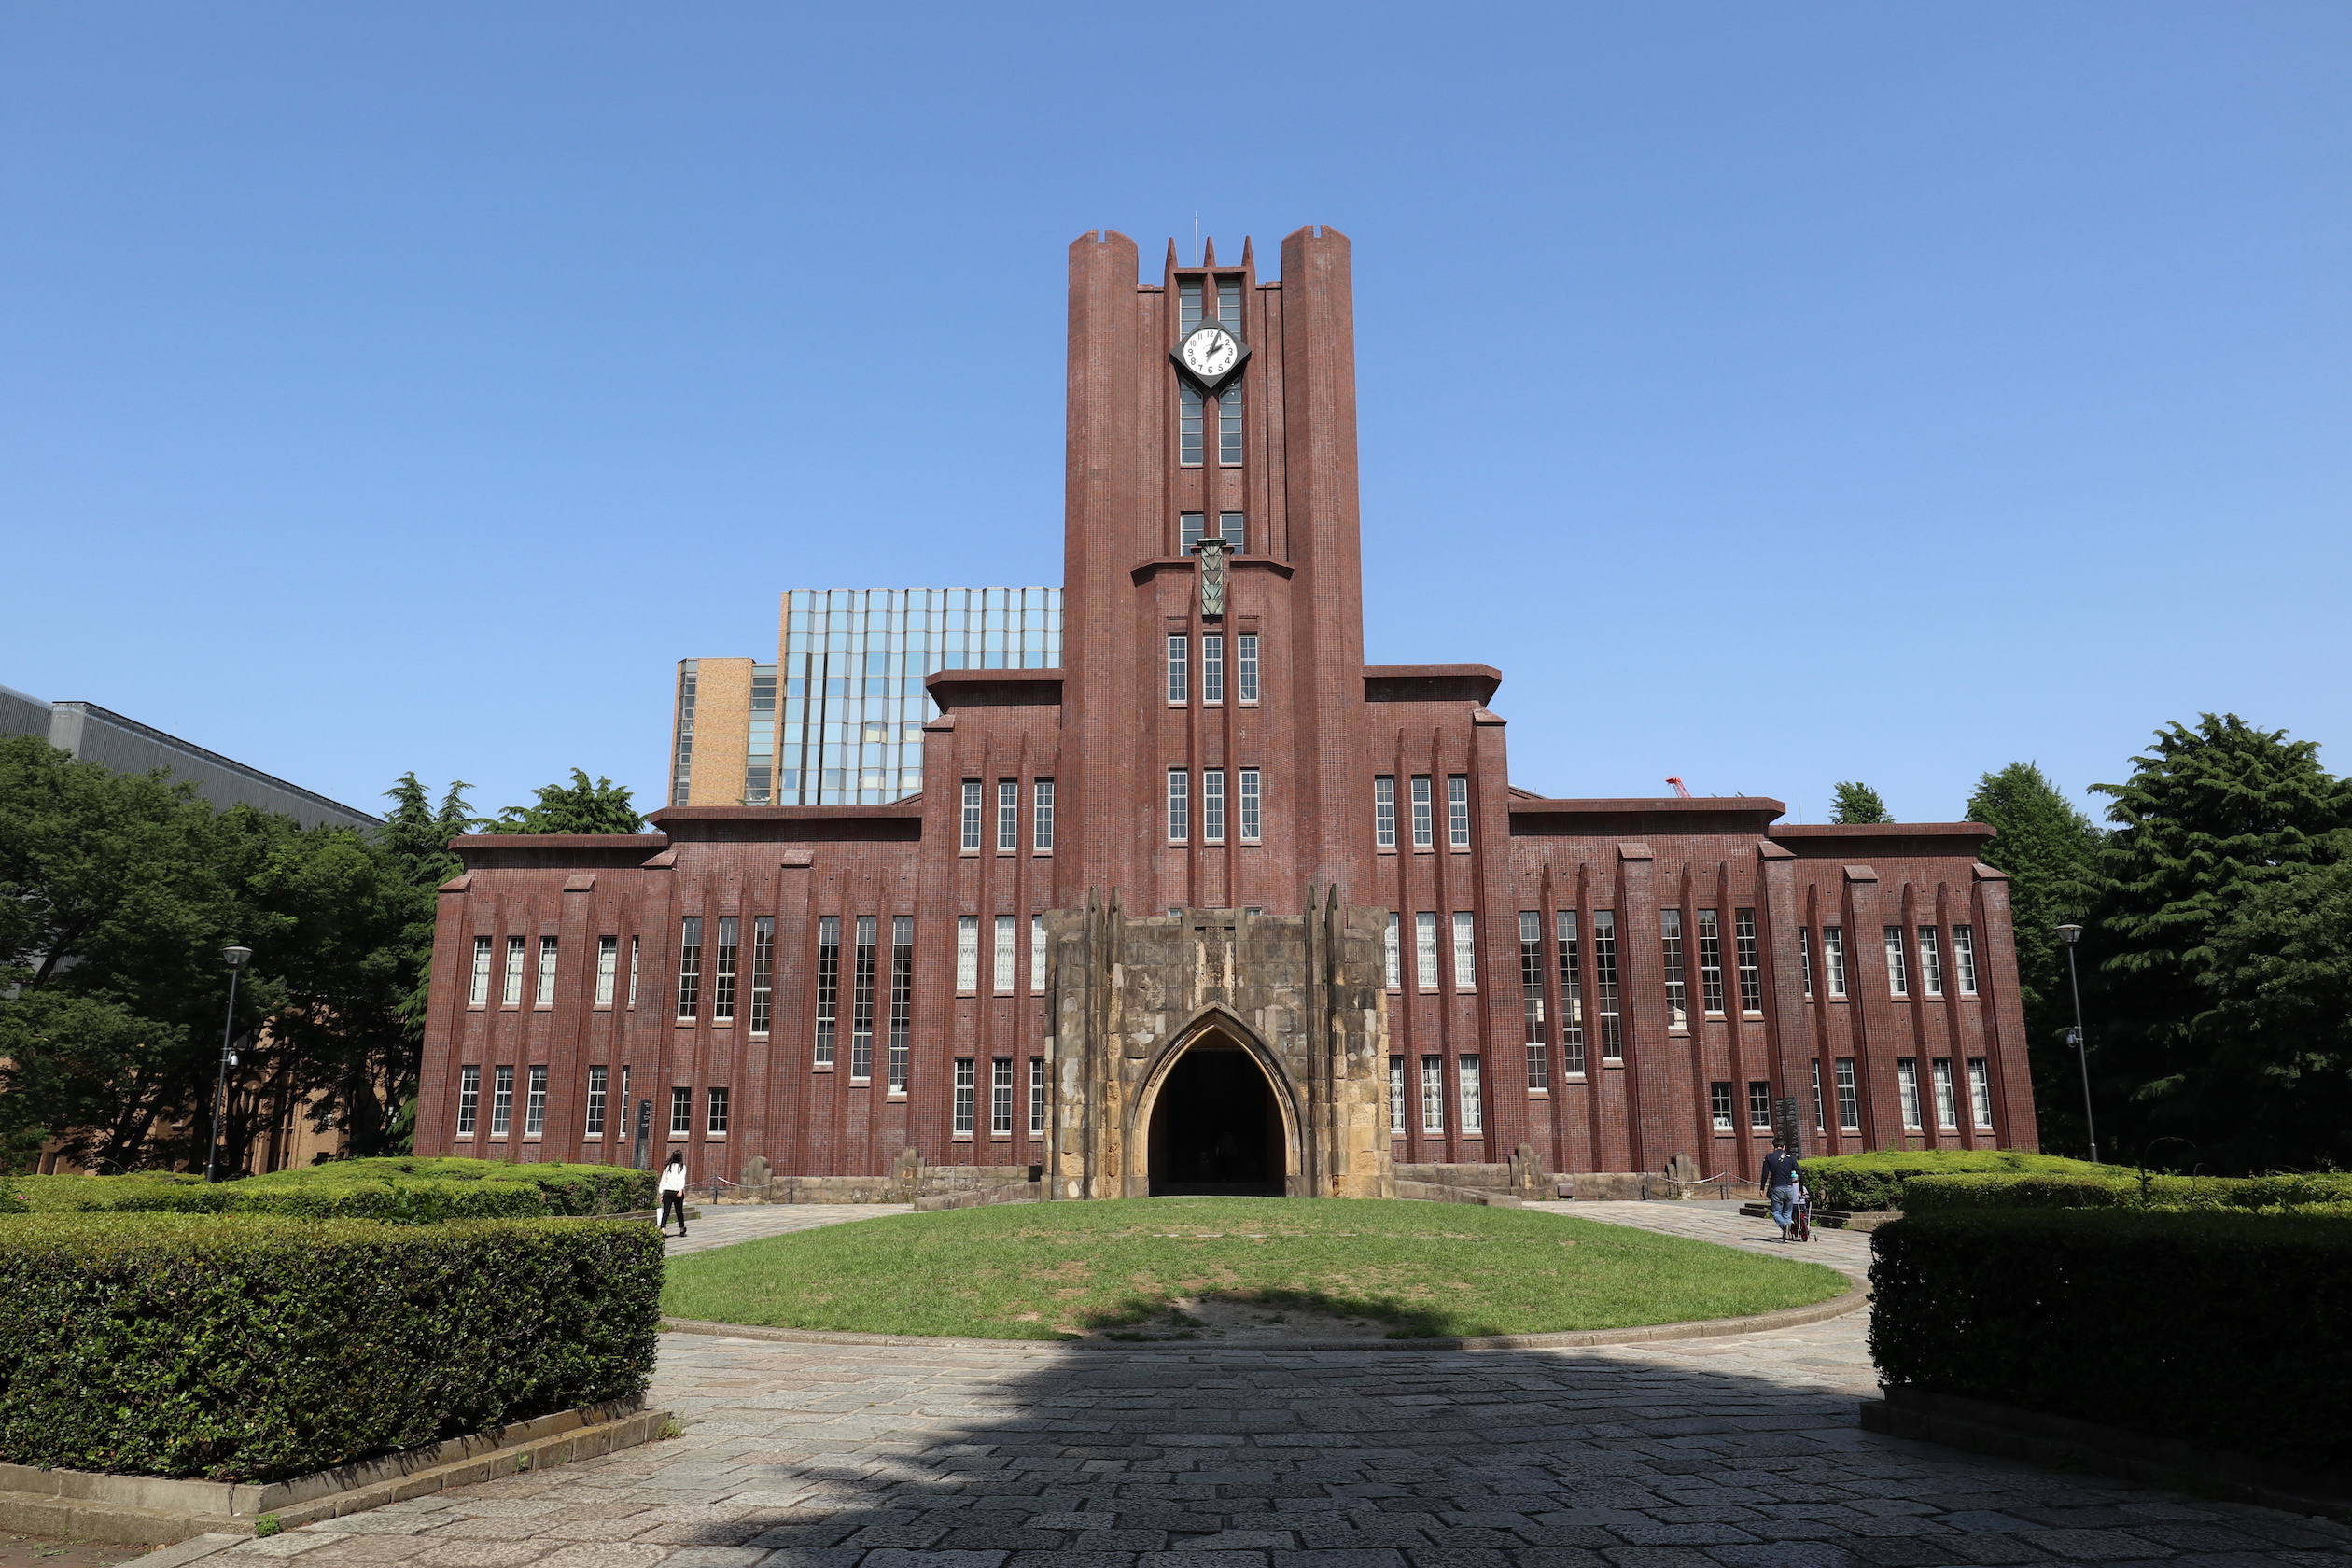 The University of Tokyo, Japan. Photo from Adobe Stock.